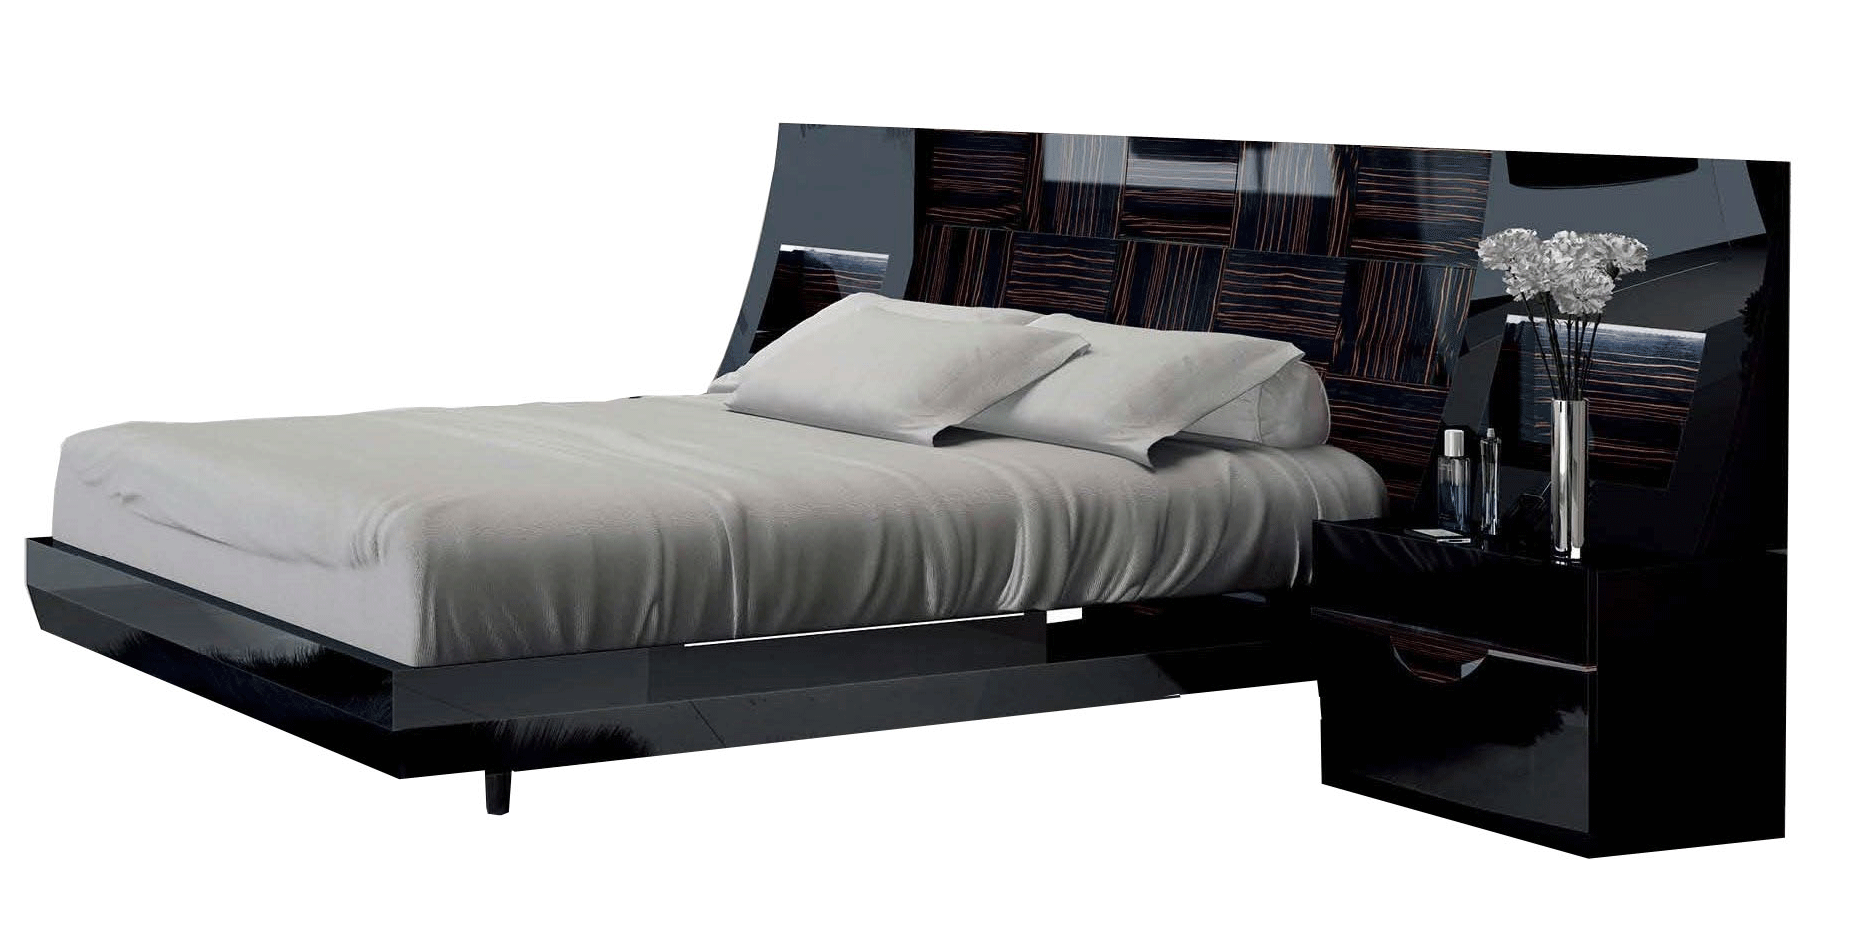 Bedroom Furniture Beds with storage Marbella Bed QS bed ONLY